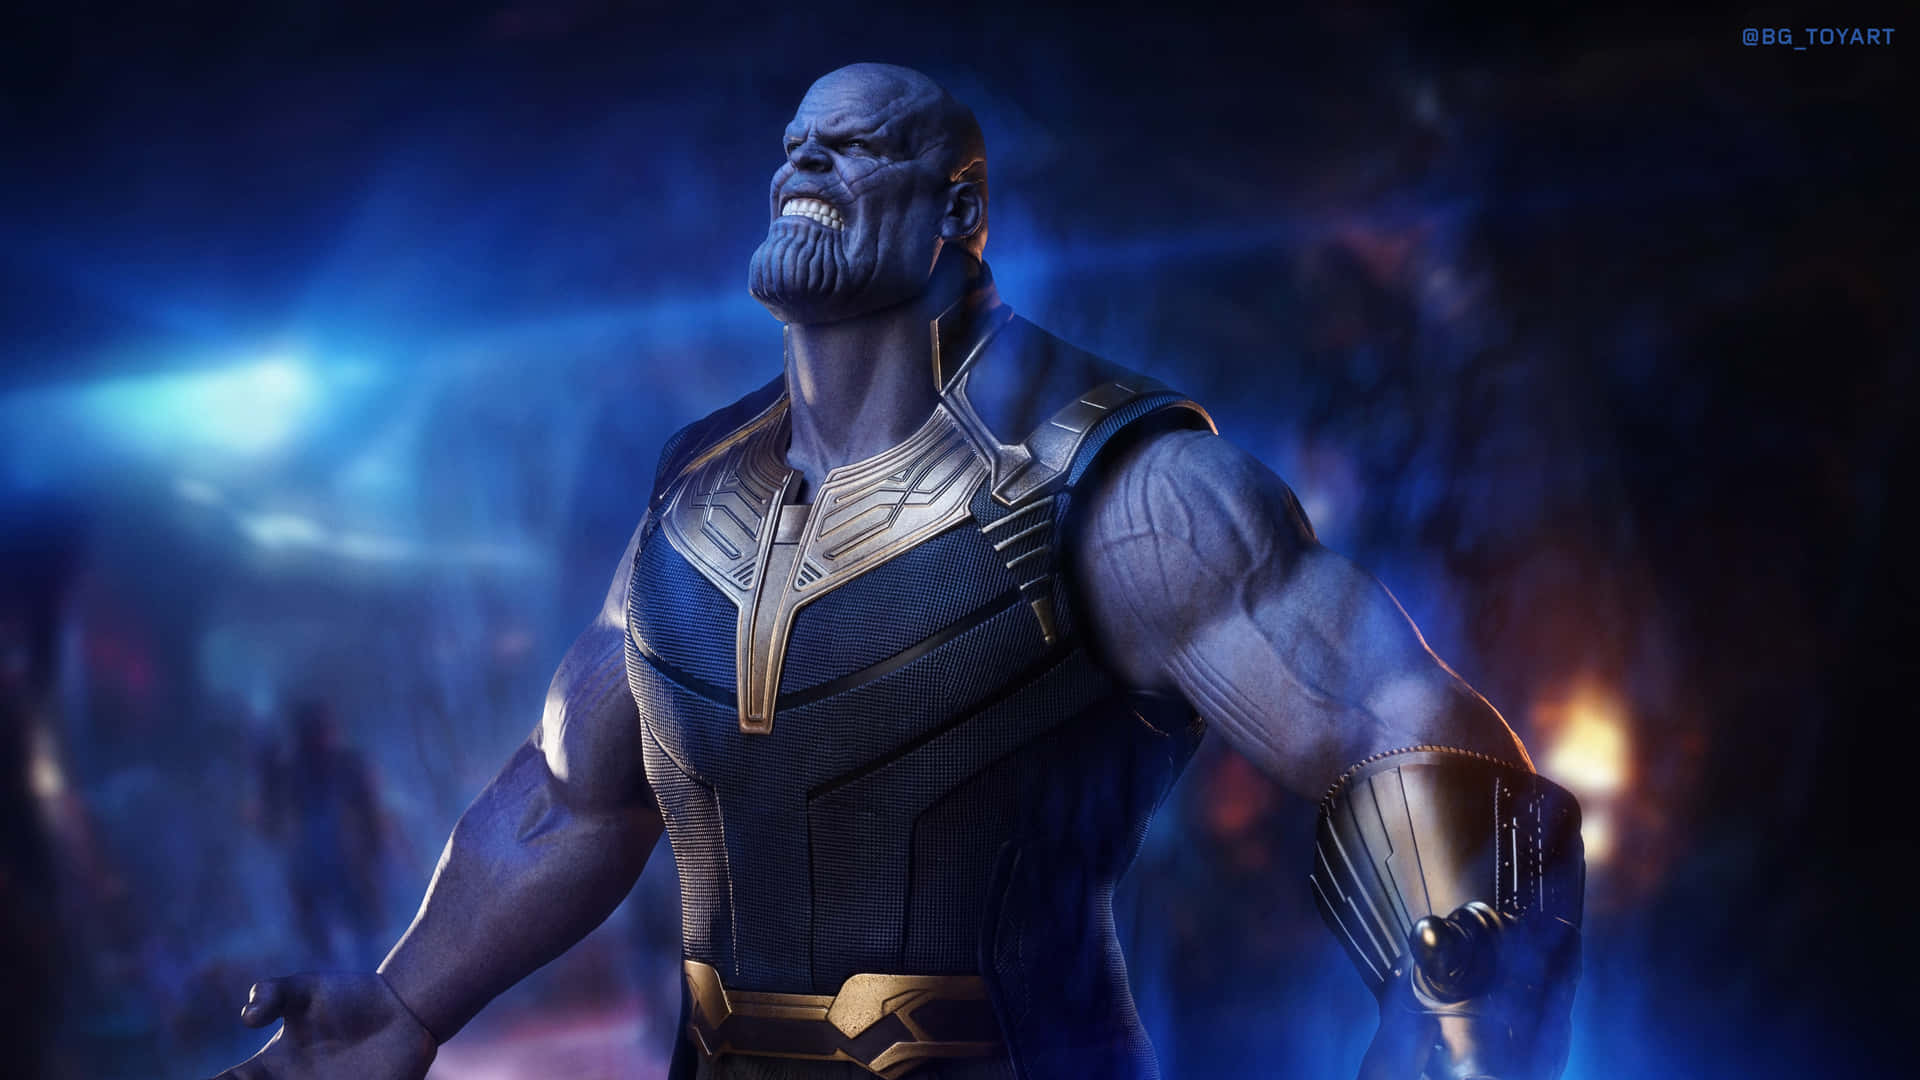 Image  The Avengers Assemble In Awe of Thanos Wallpaper